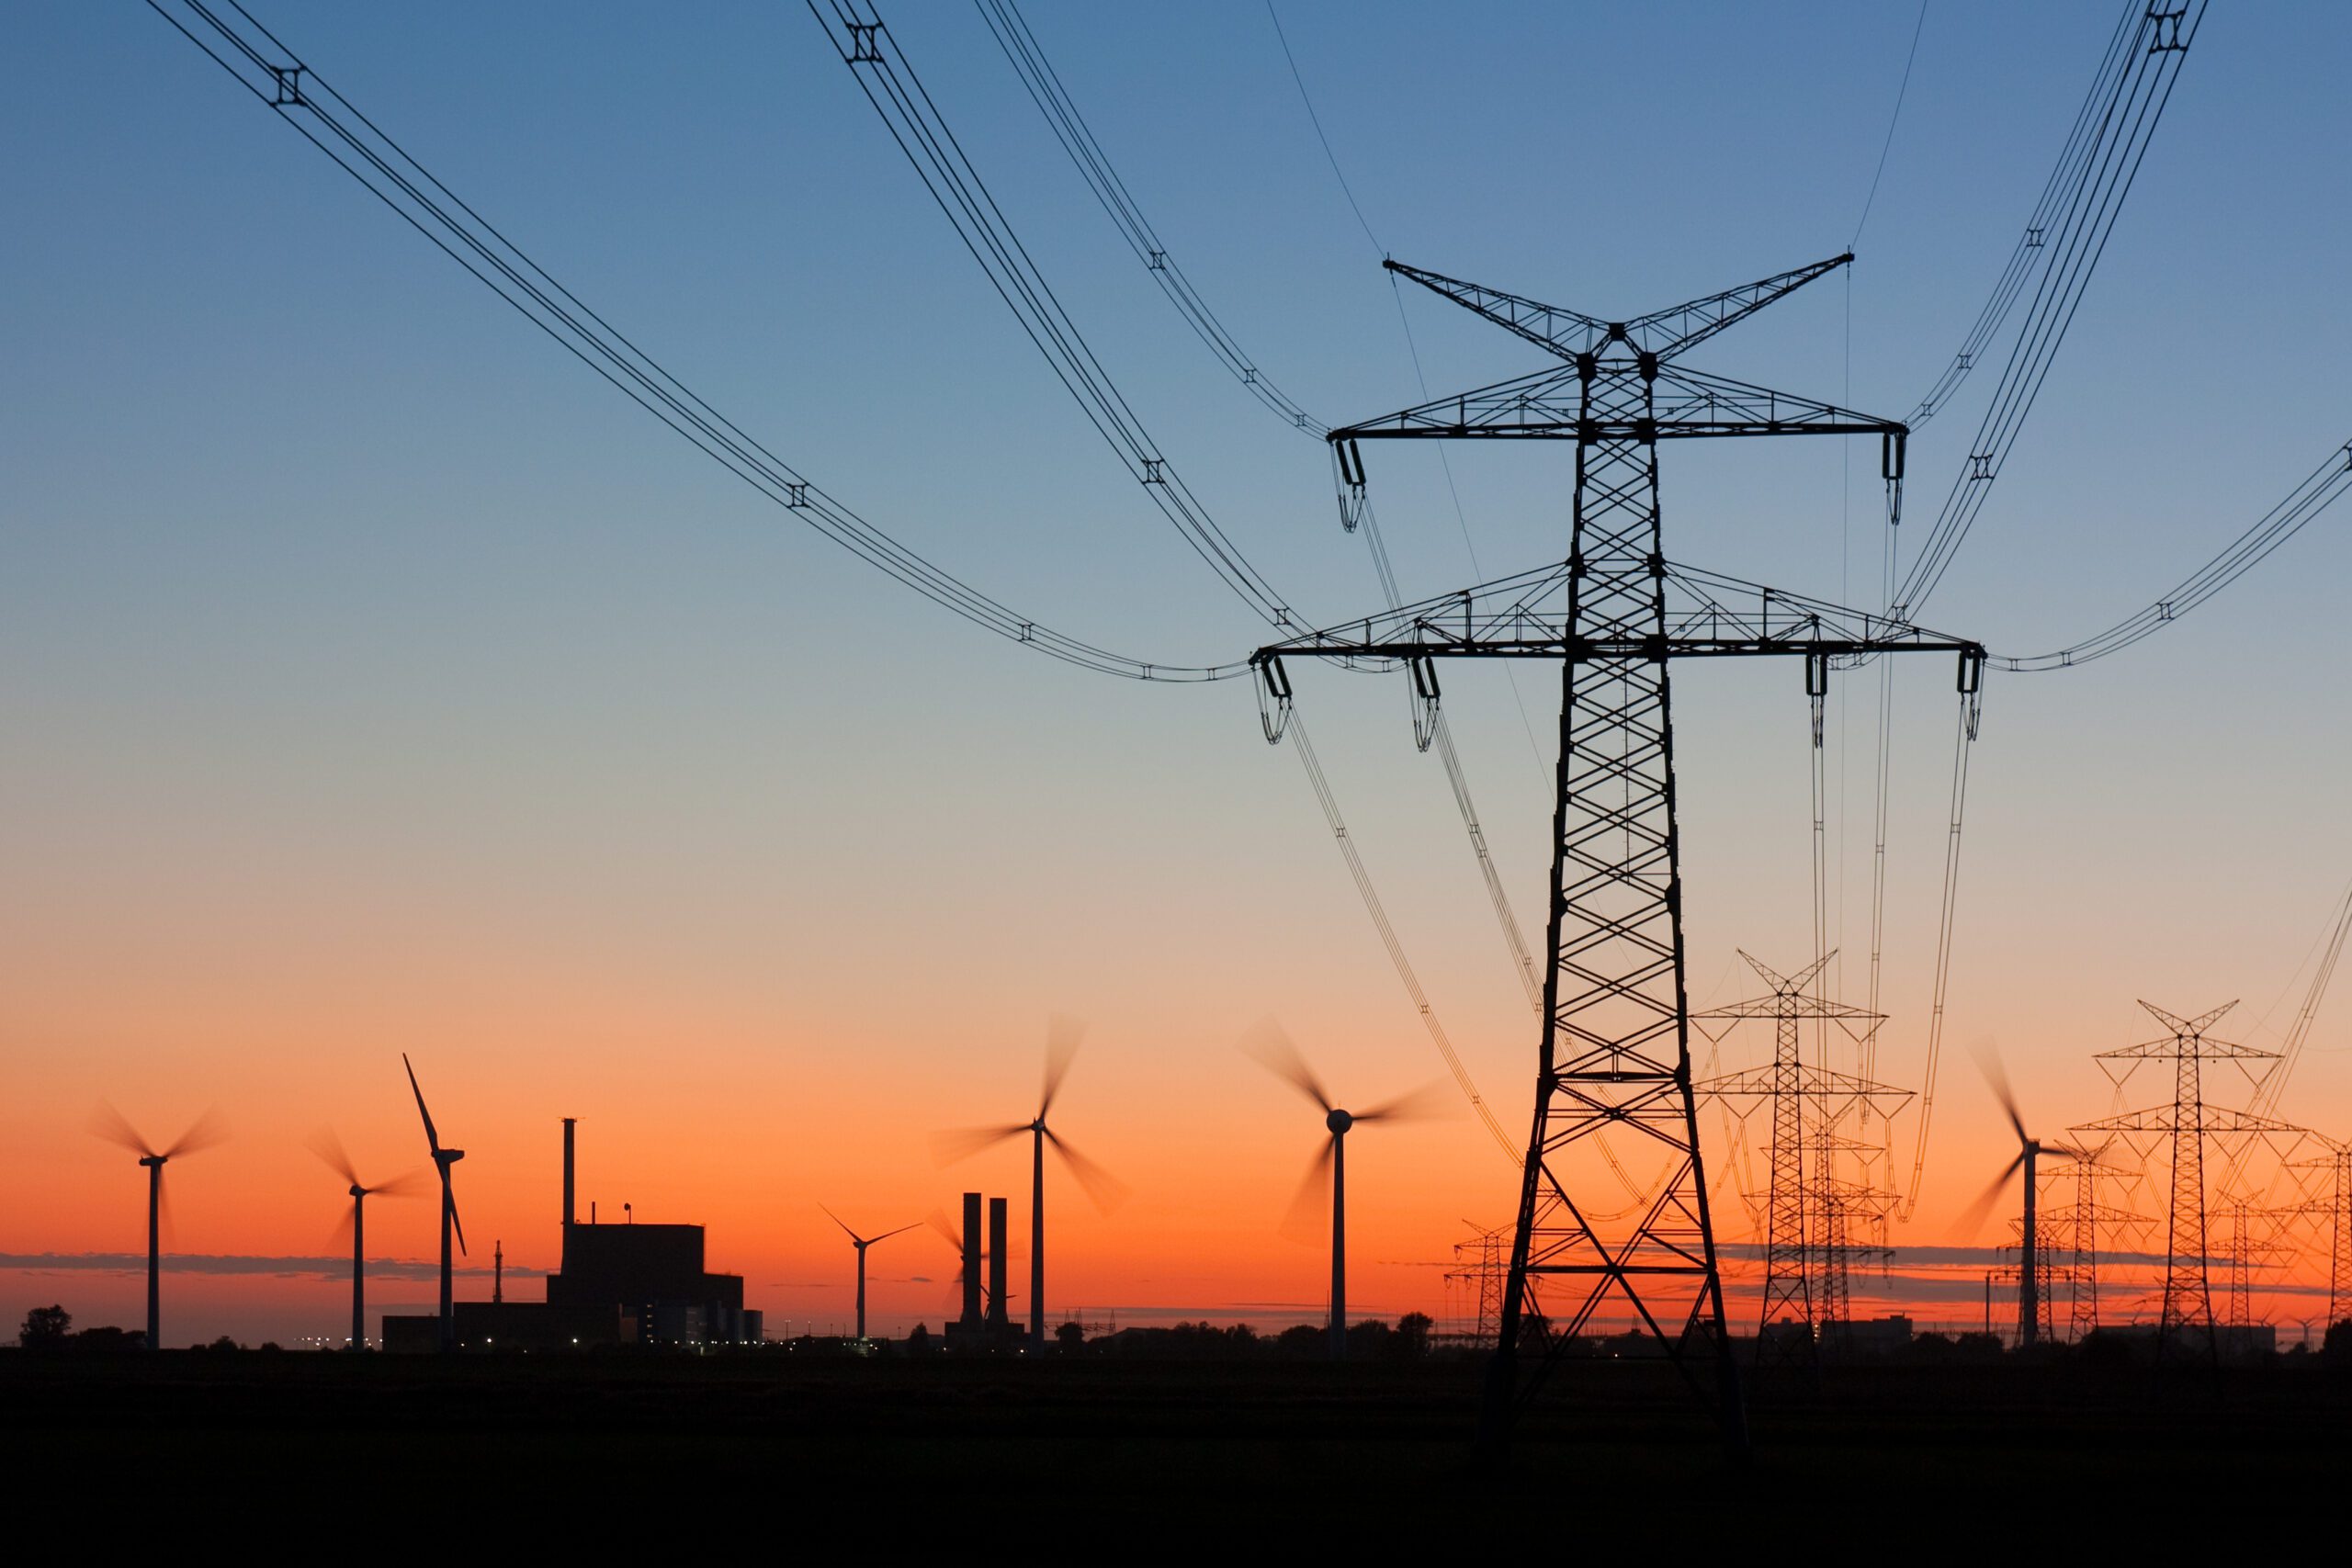 High,Voltage,Power,Lines,With,Electricity,Pylons,At,Twilight